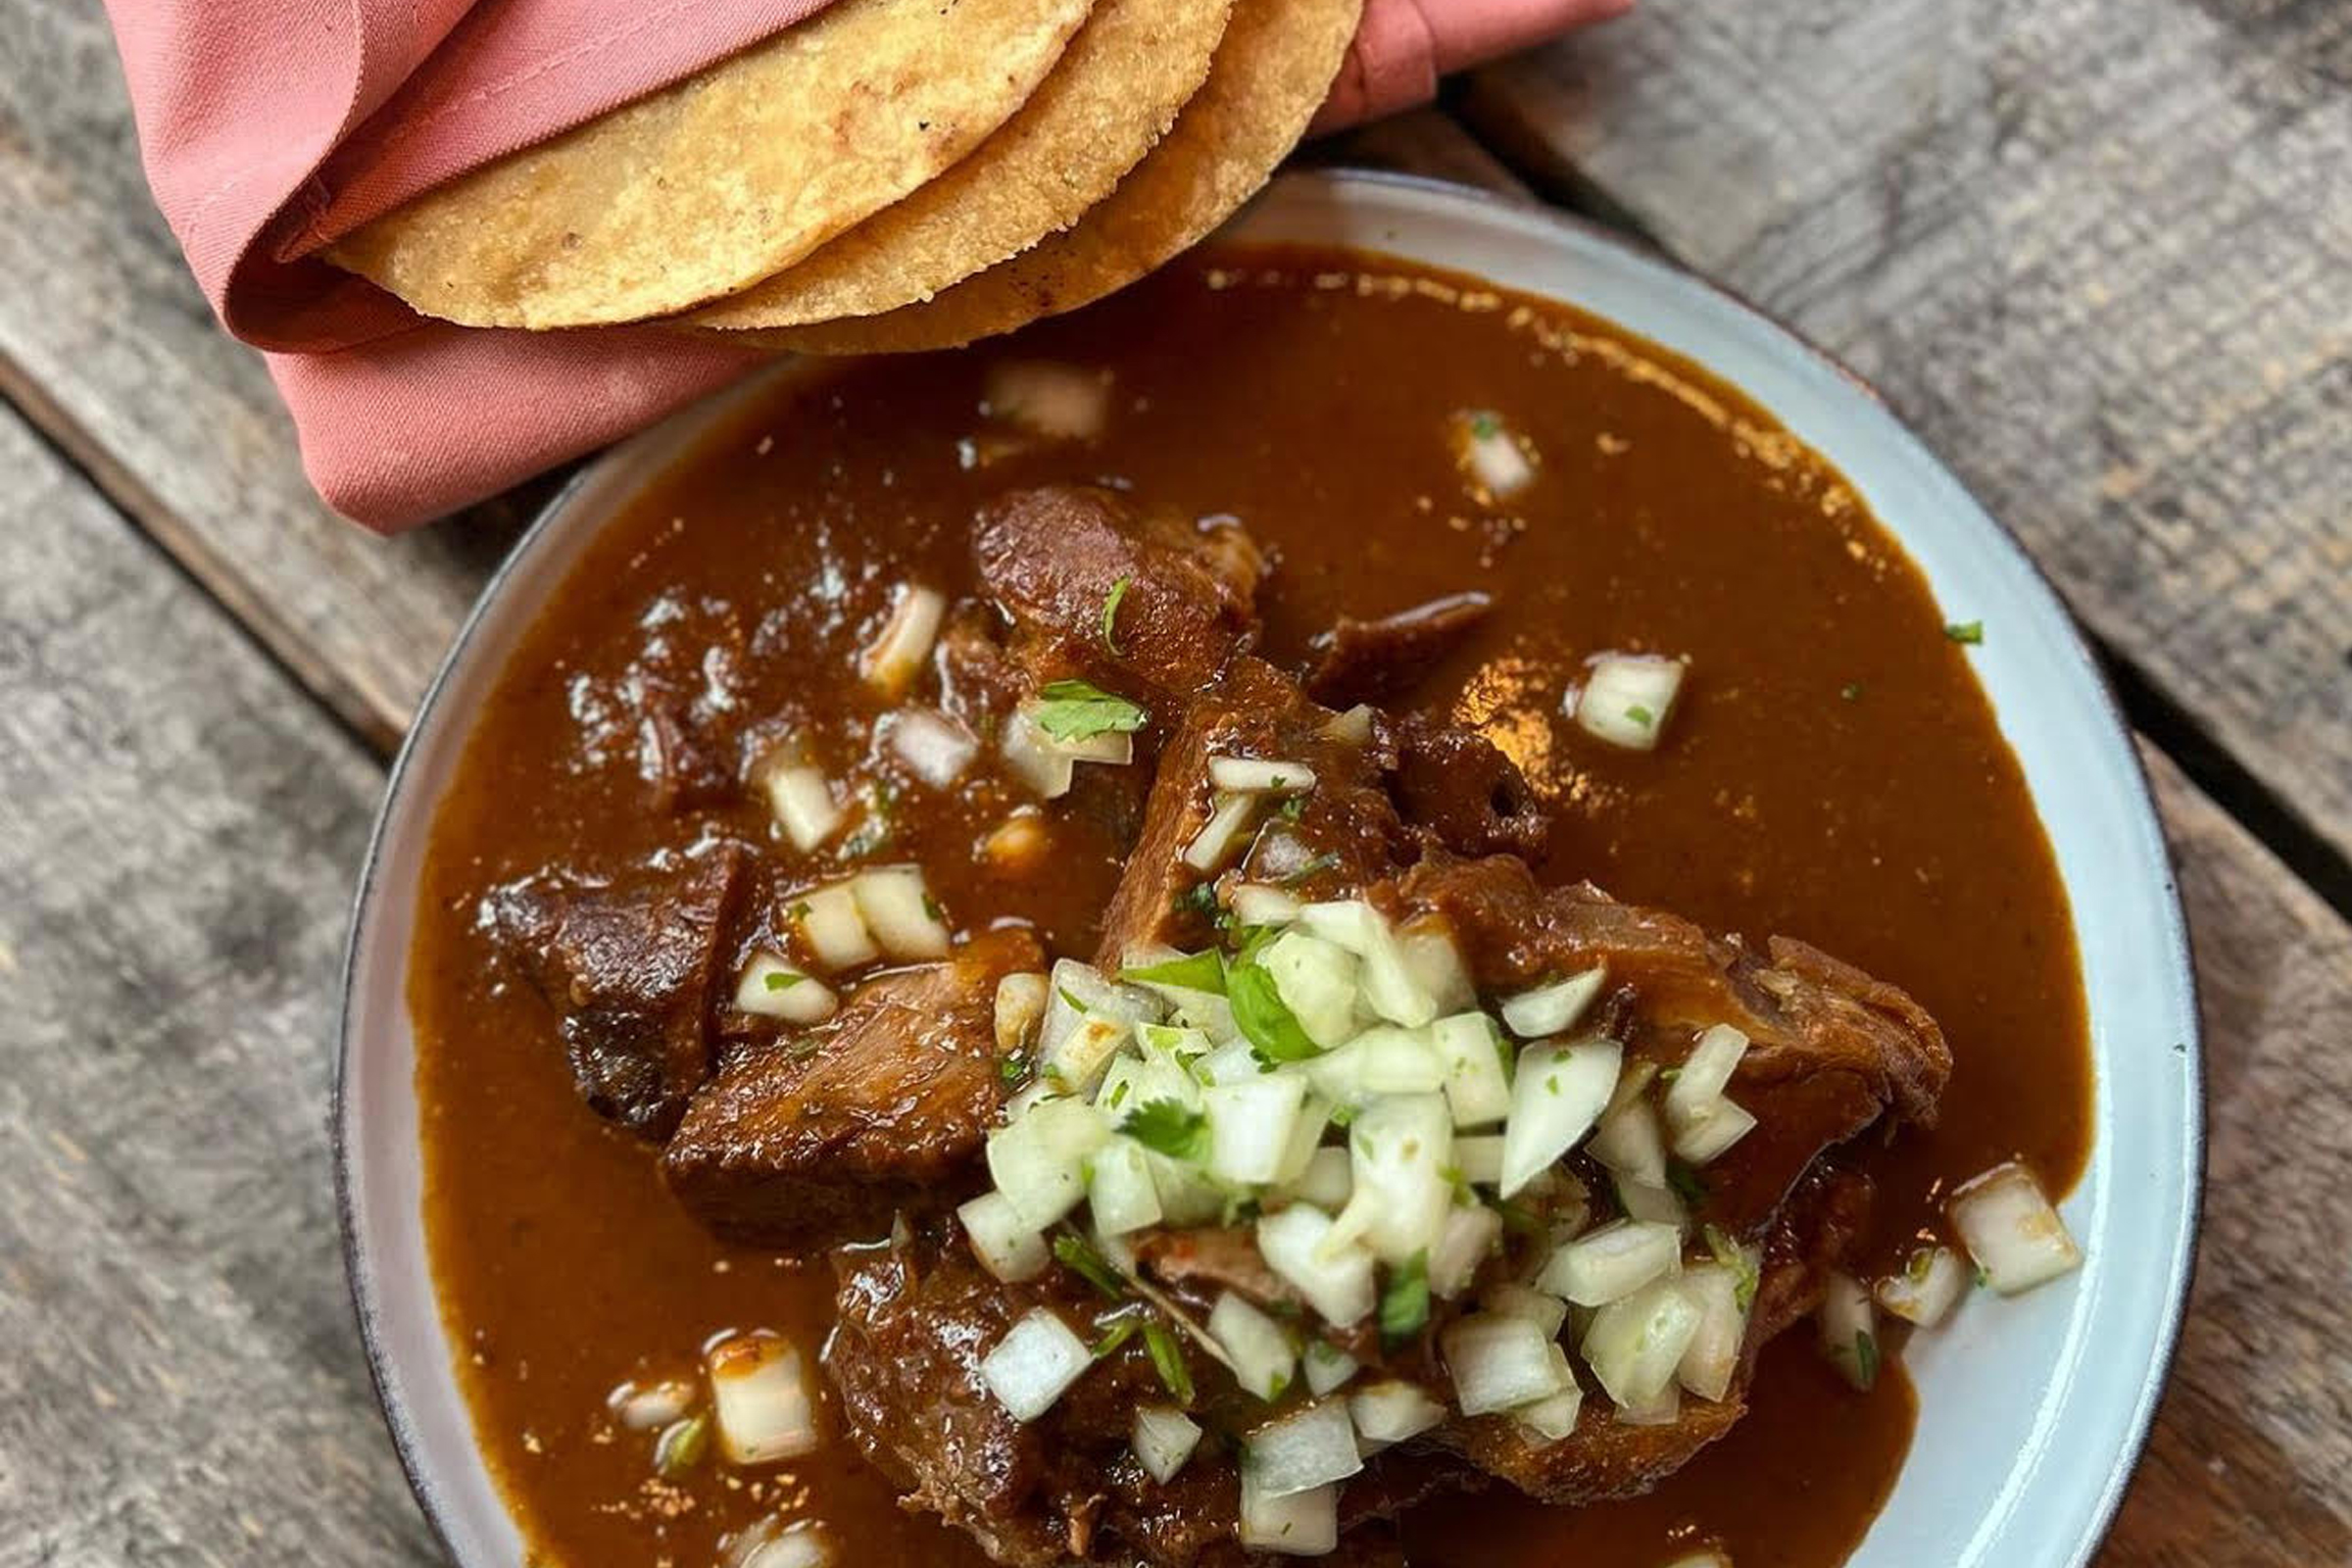 A plate of mole is served with tortillas